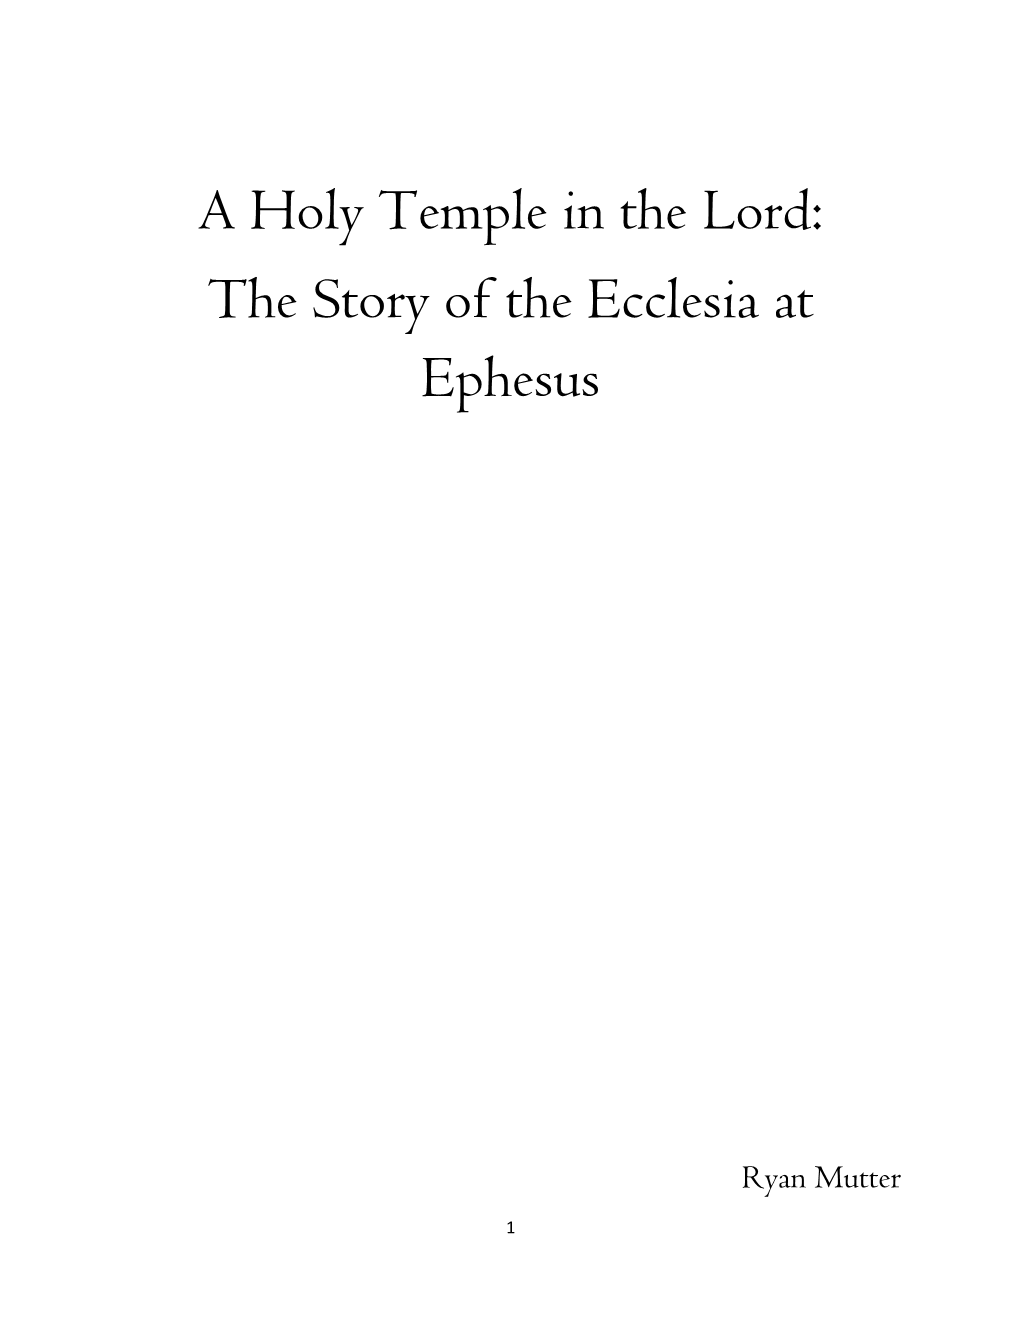 The Story of the Ecclesia at Ephesus